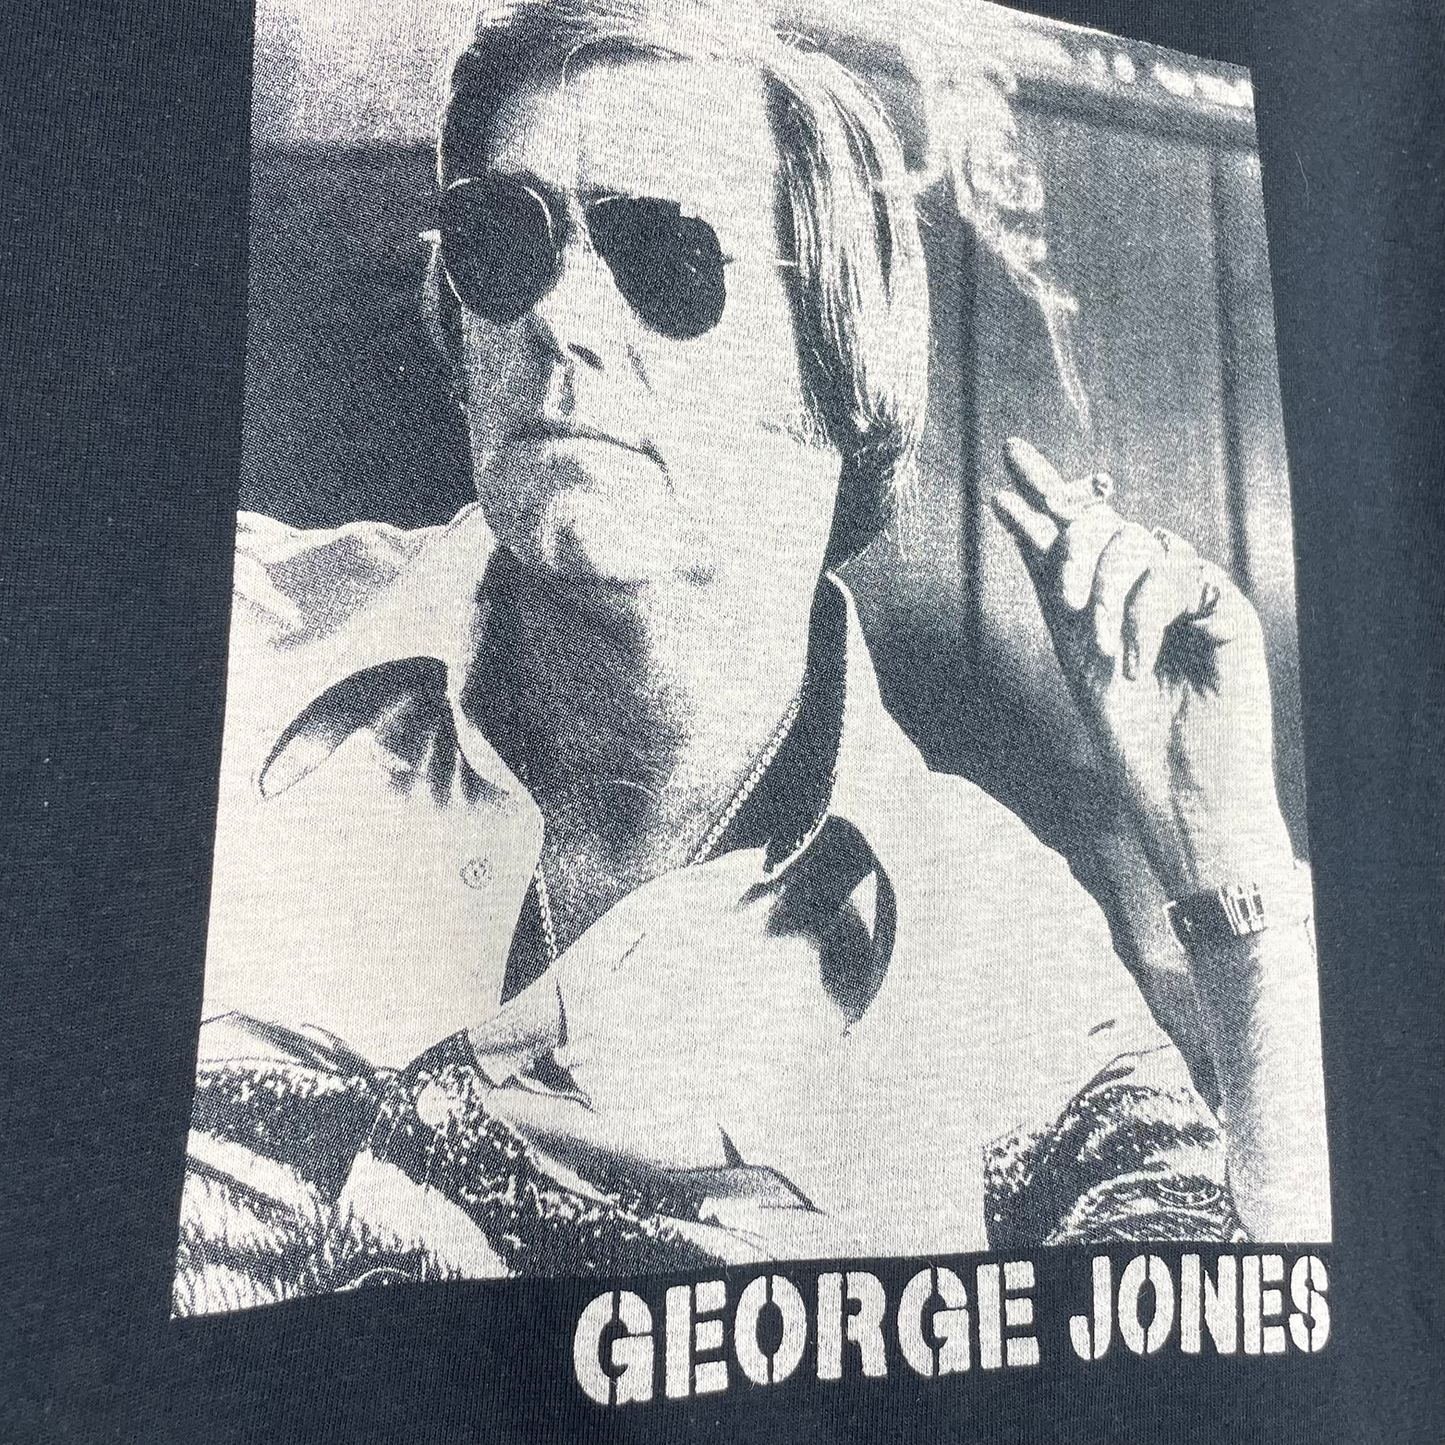 George Jones Take the Devil Out of Me T-Shirt